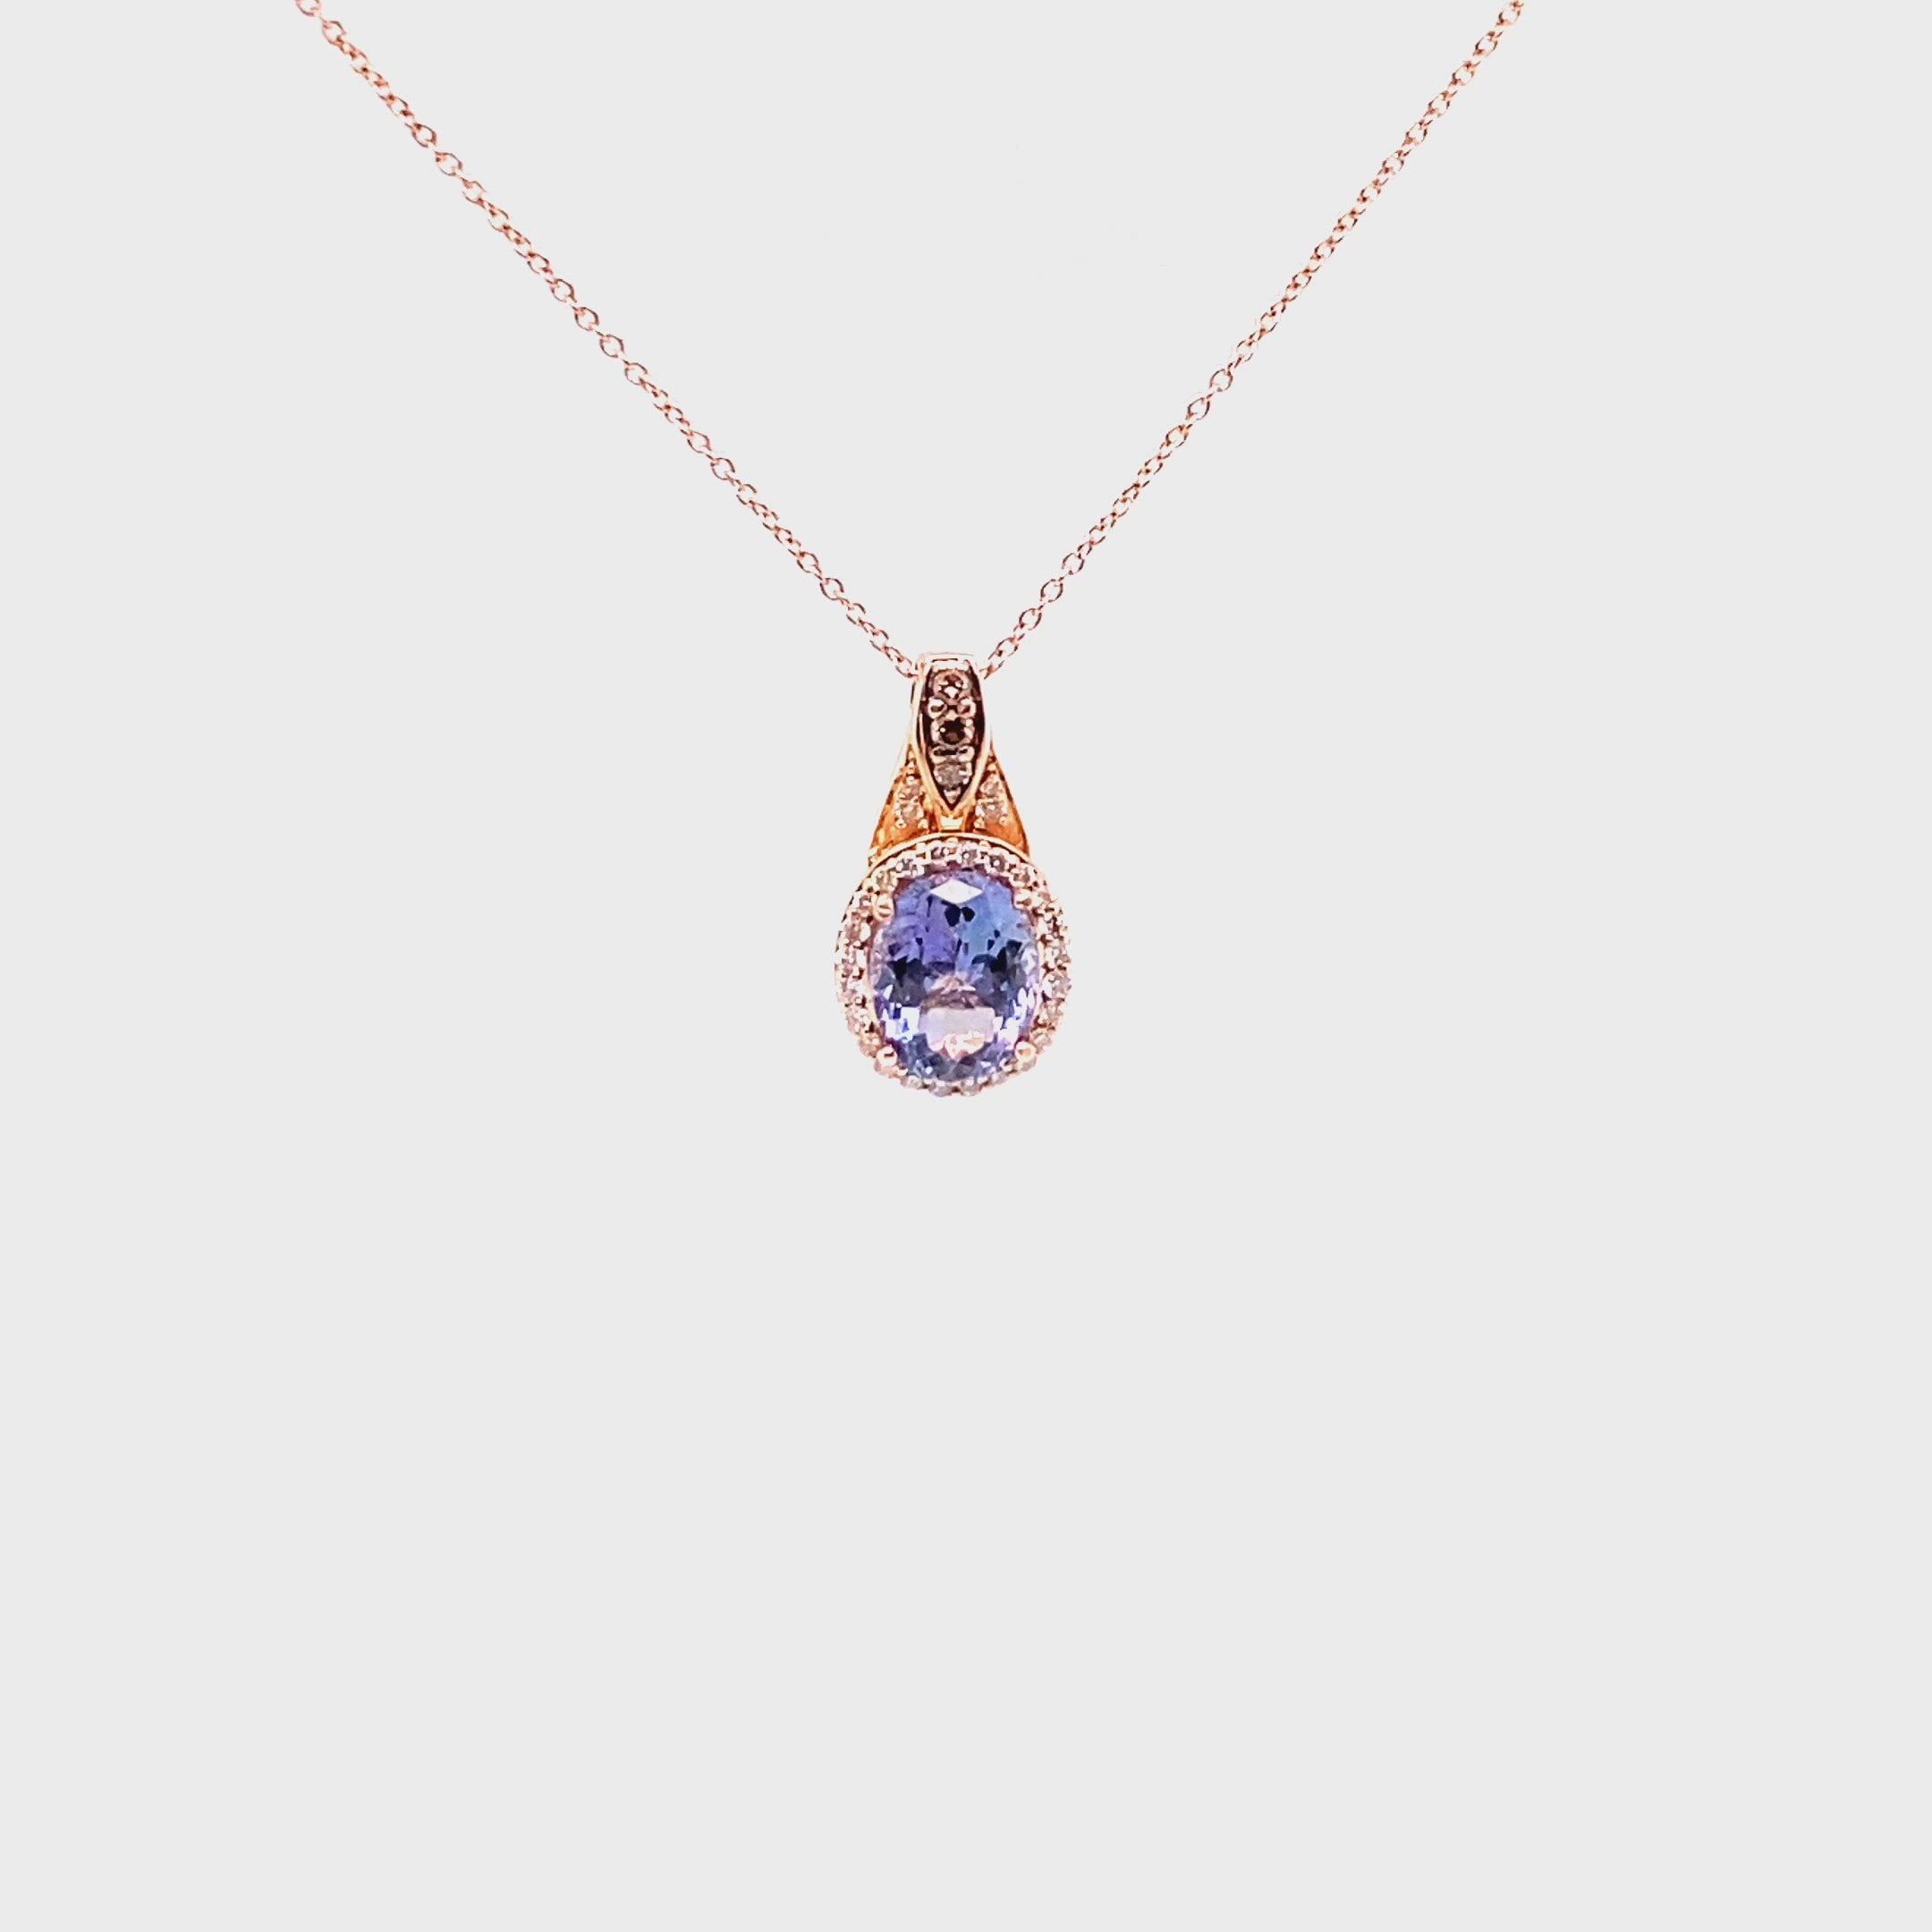 LeVian Certified Natural Tanzanite & Chocolate Diamond Necklace 14K Solid Rose Gold 3.18tcw LeVian Necklace Tanzanite Necklace Fine Designer